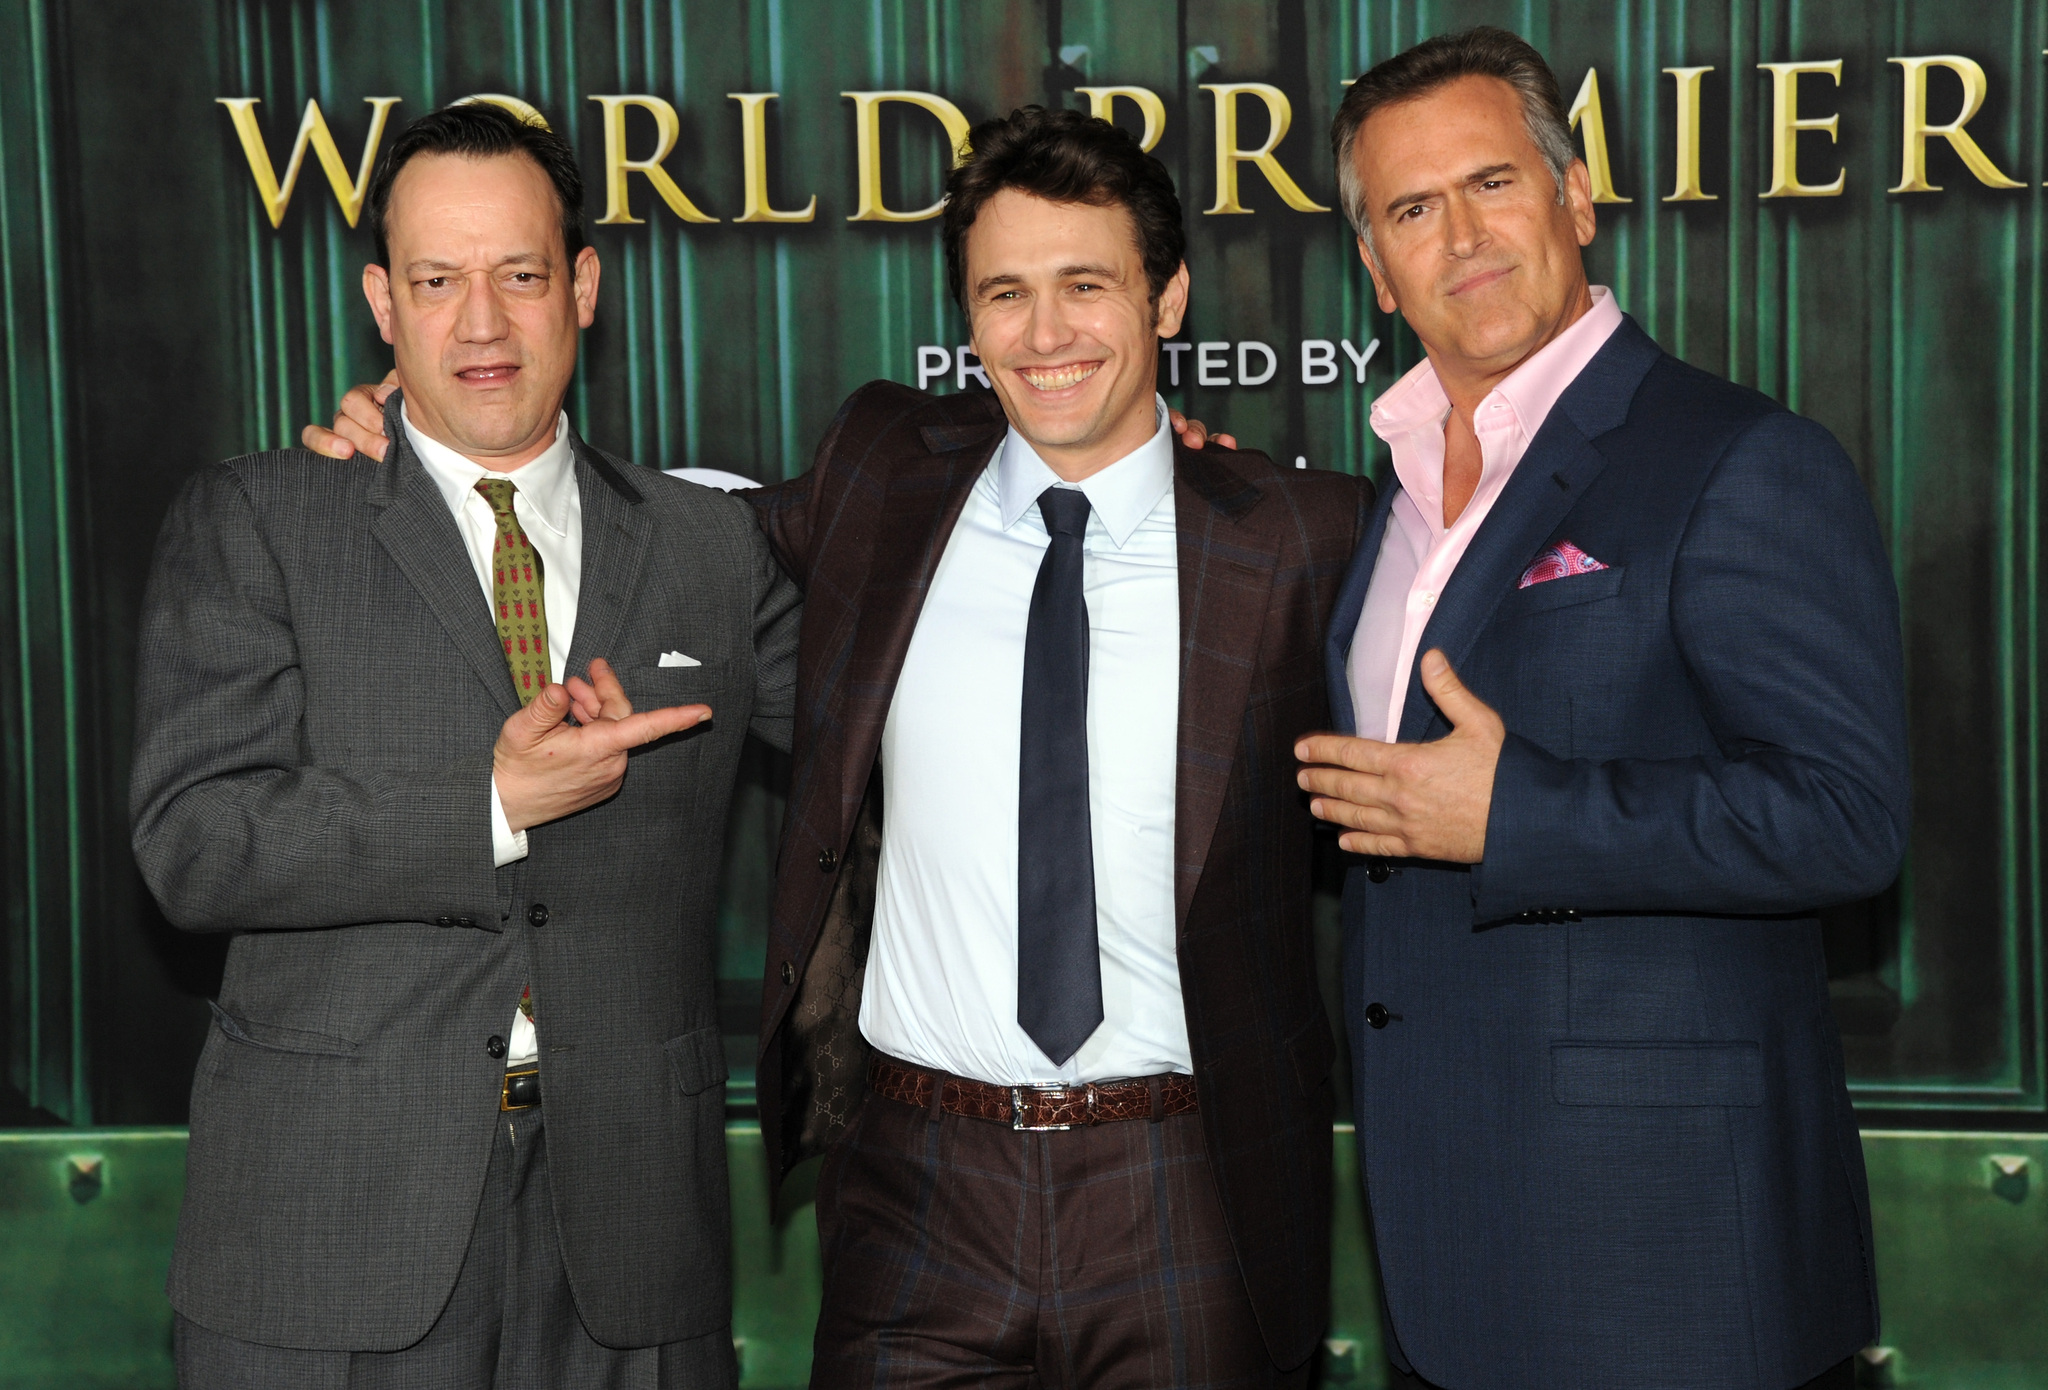 Same Raimi, James Franco and Bruce Campbell attend the world premiere of Walt Disney Pictures' 